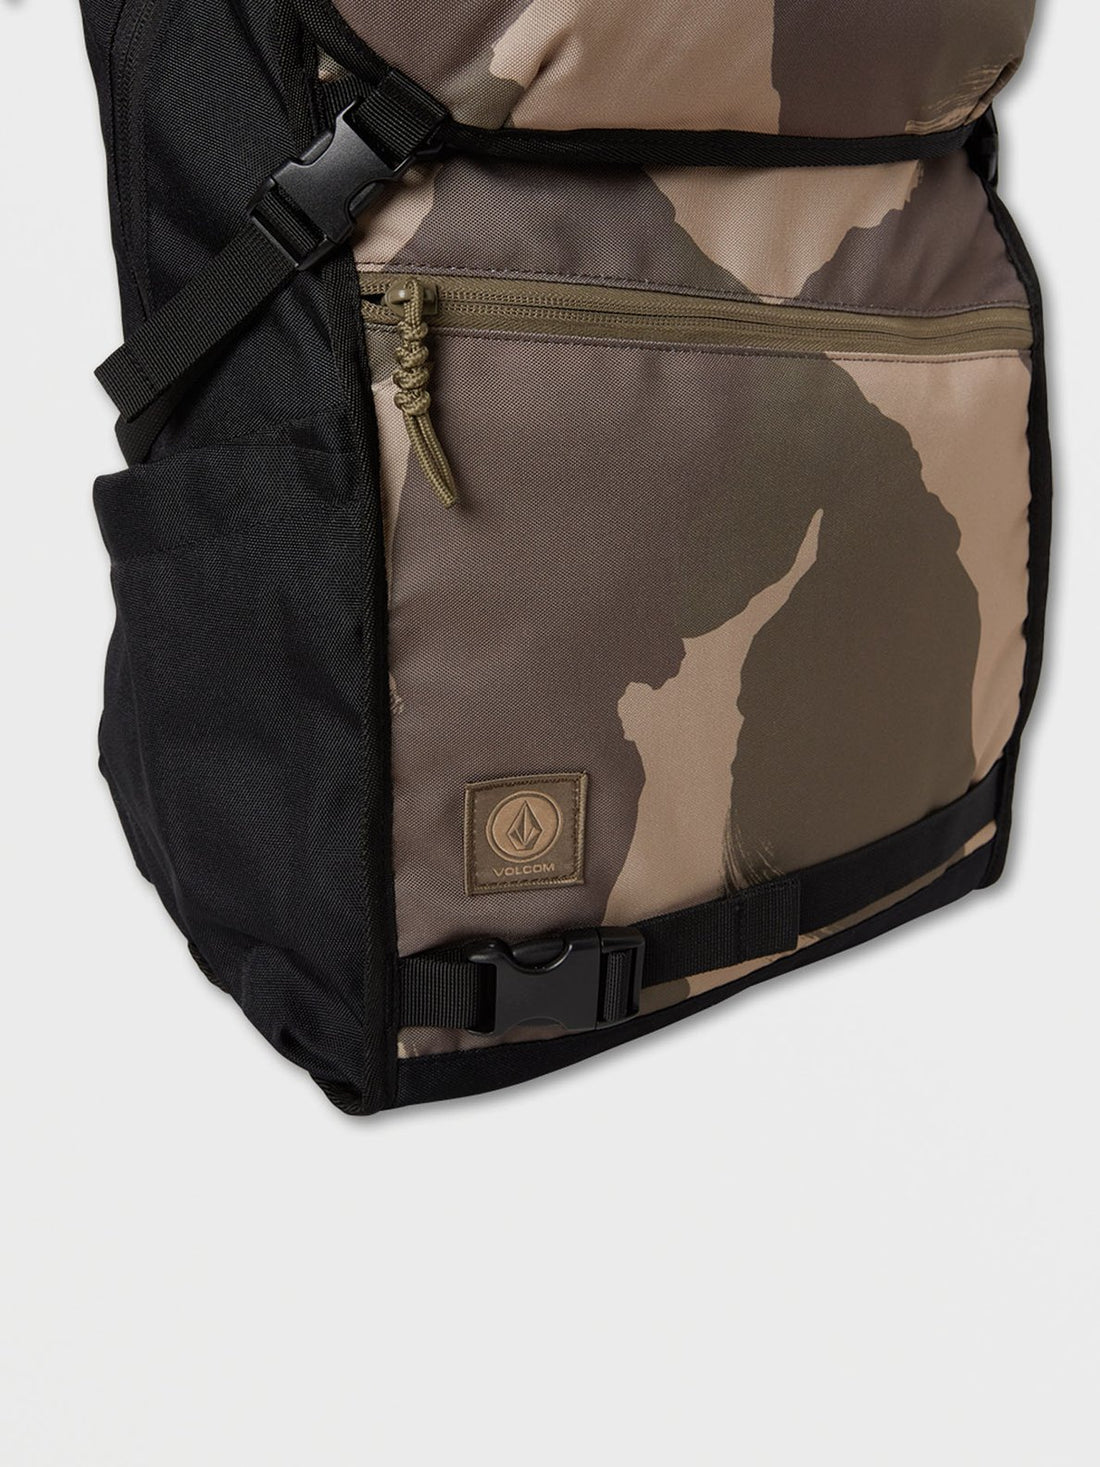 VOLCOM SUBSTRATE BACKPACK - CAMOUFLAGE